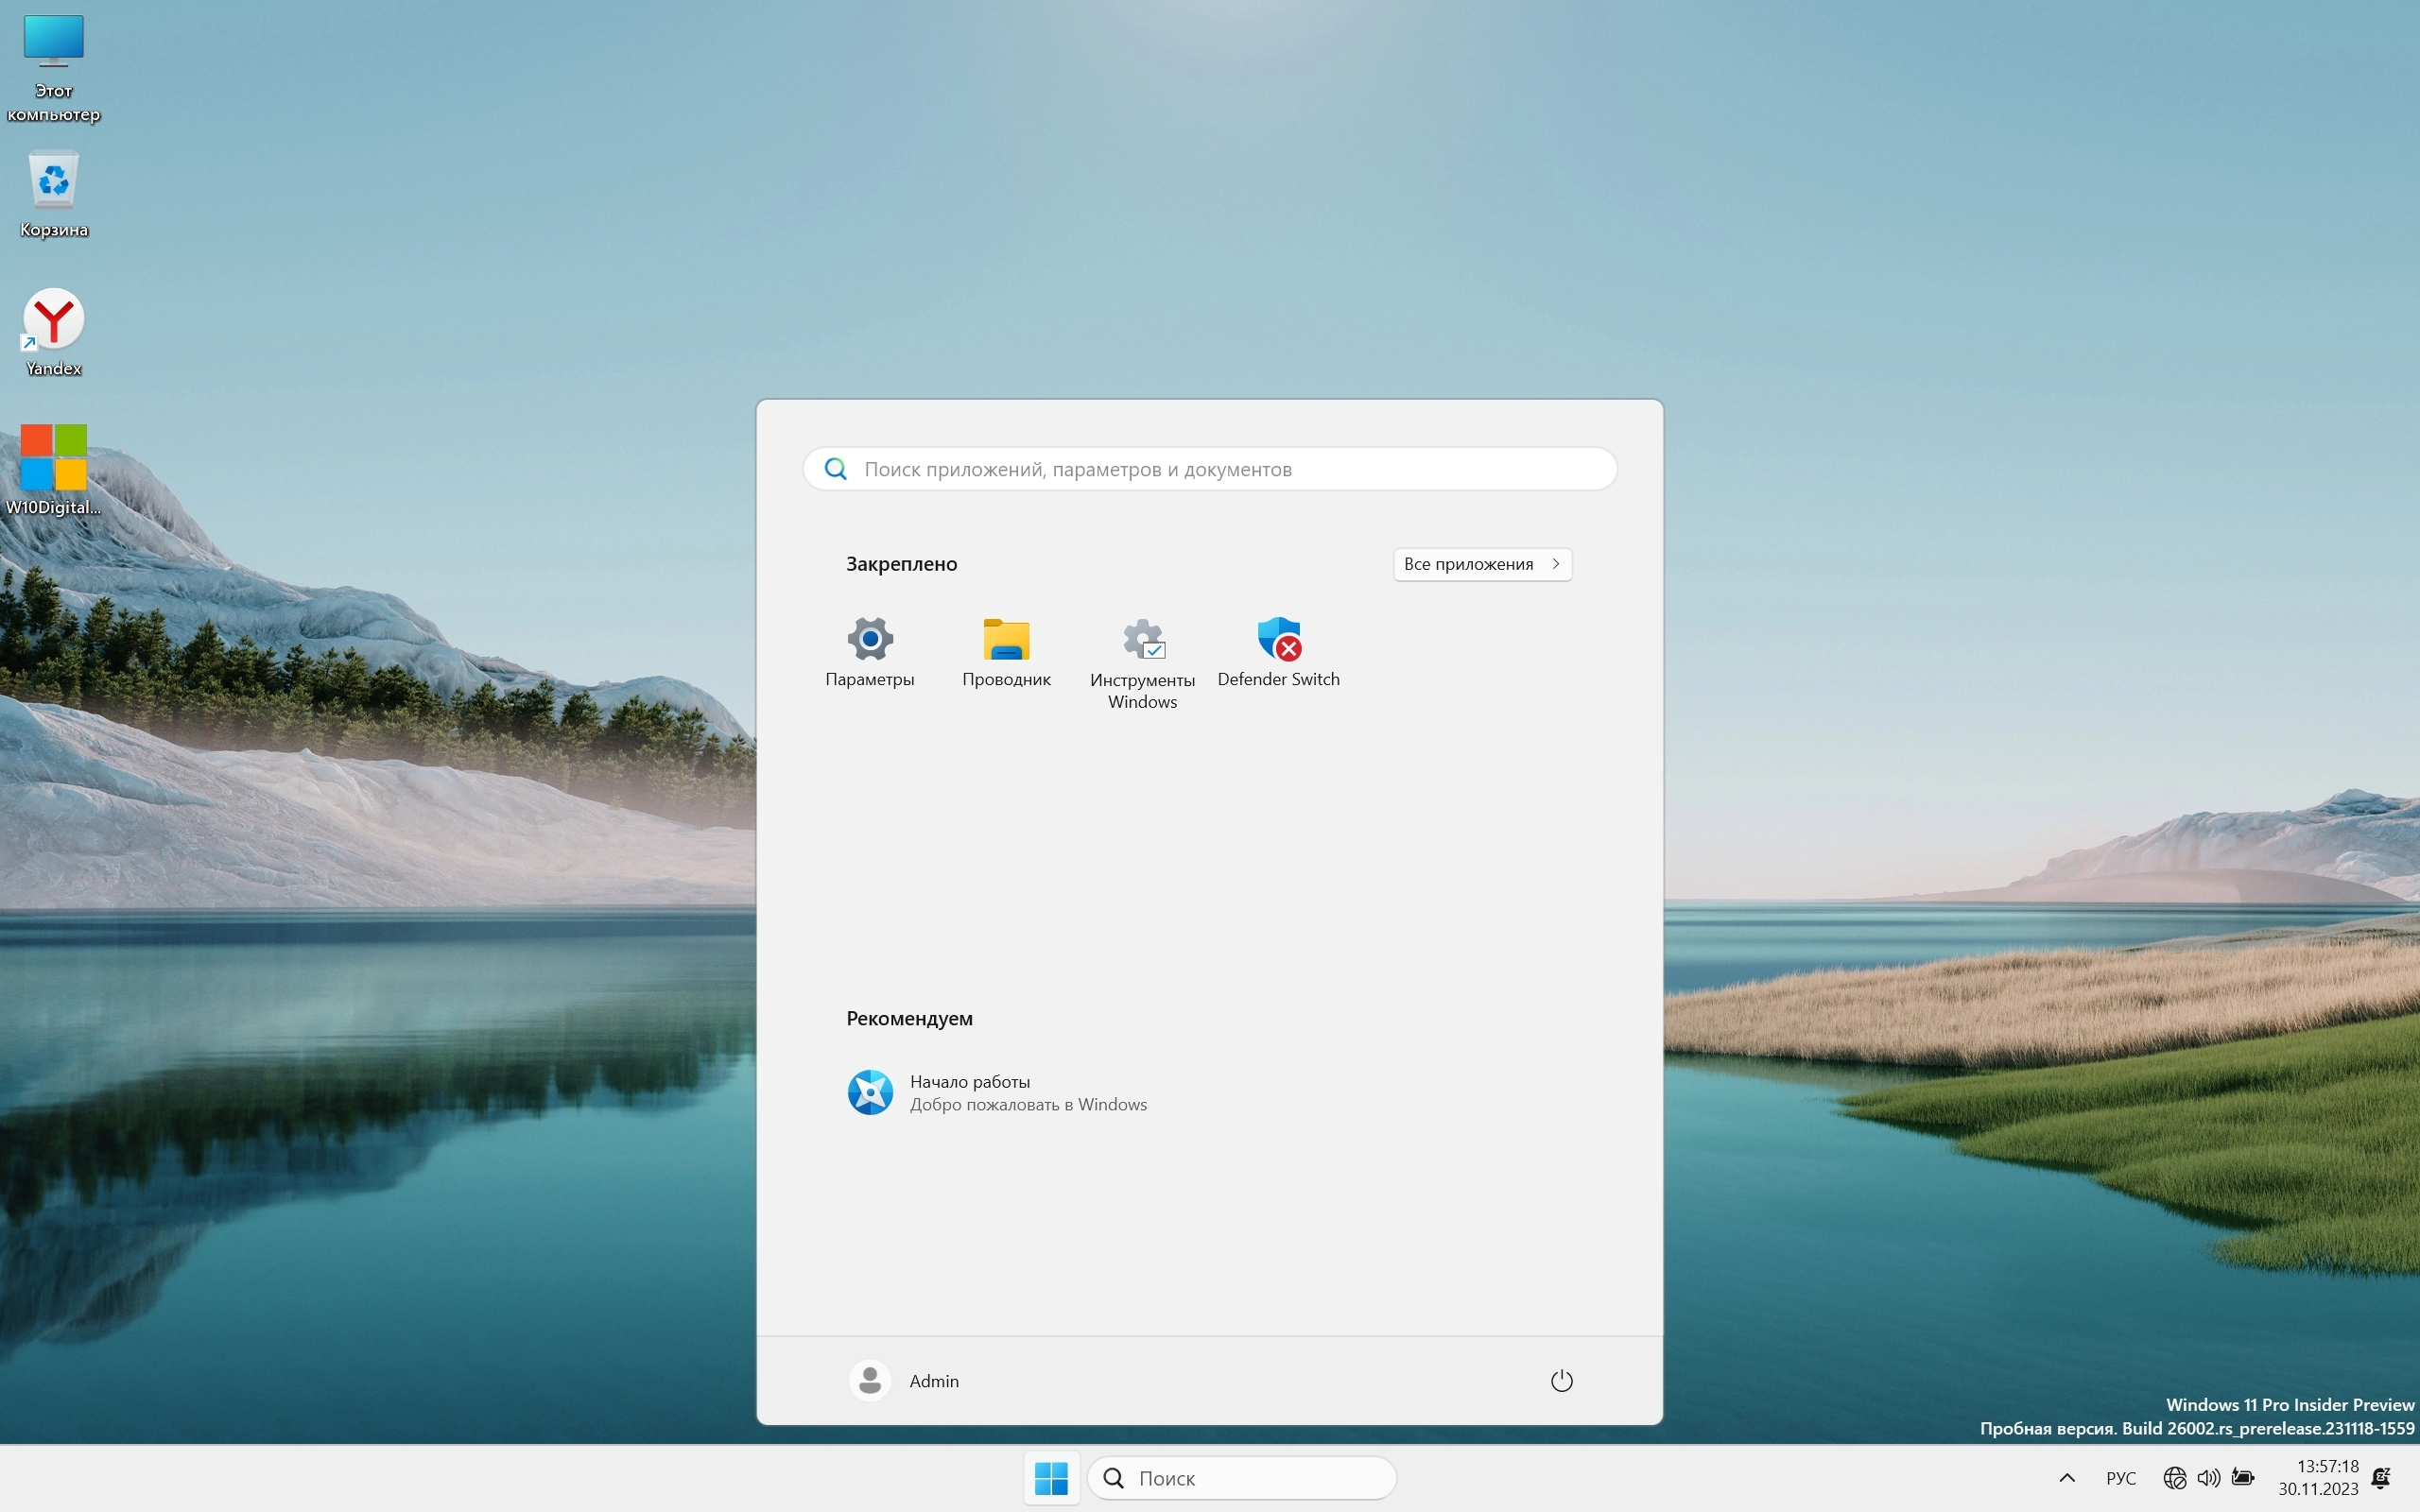 Windows 11 Pro 23H2 x64 Русская by OneSmiLe 26002.1000